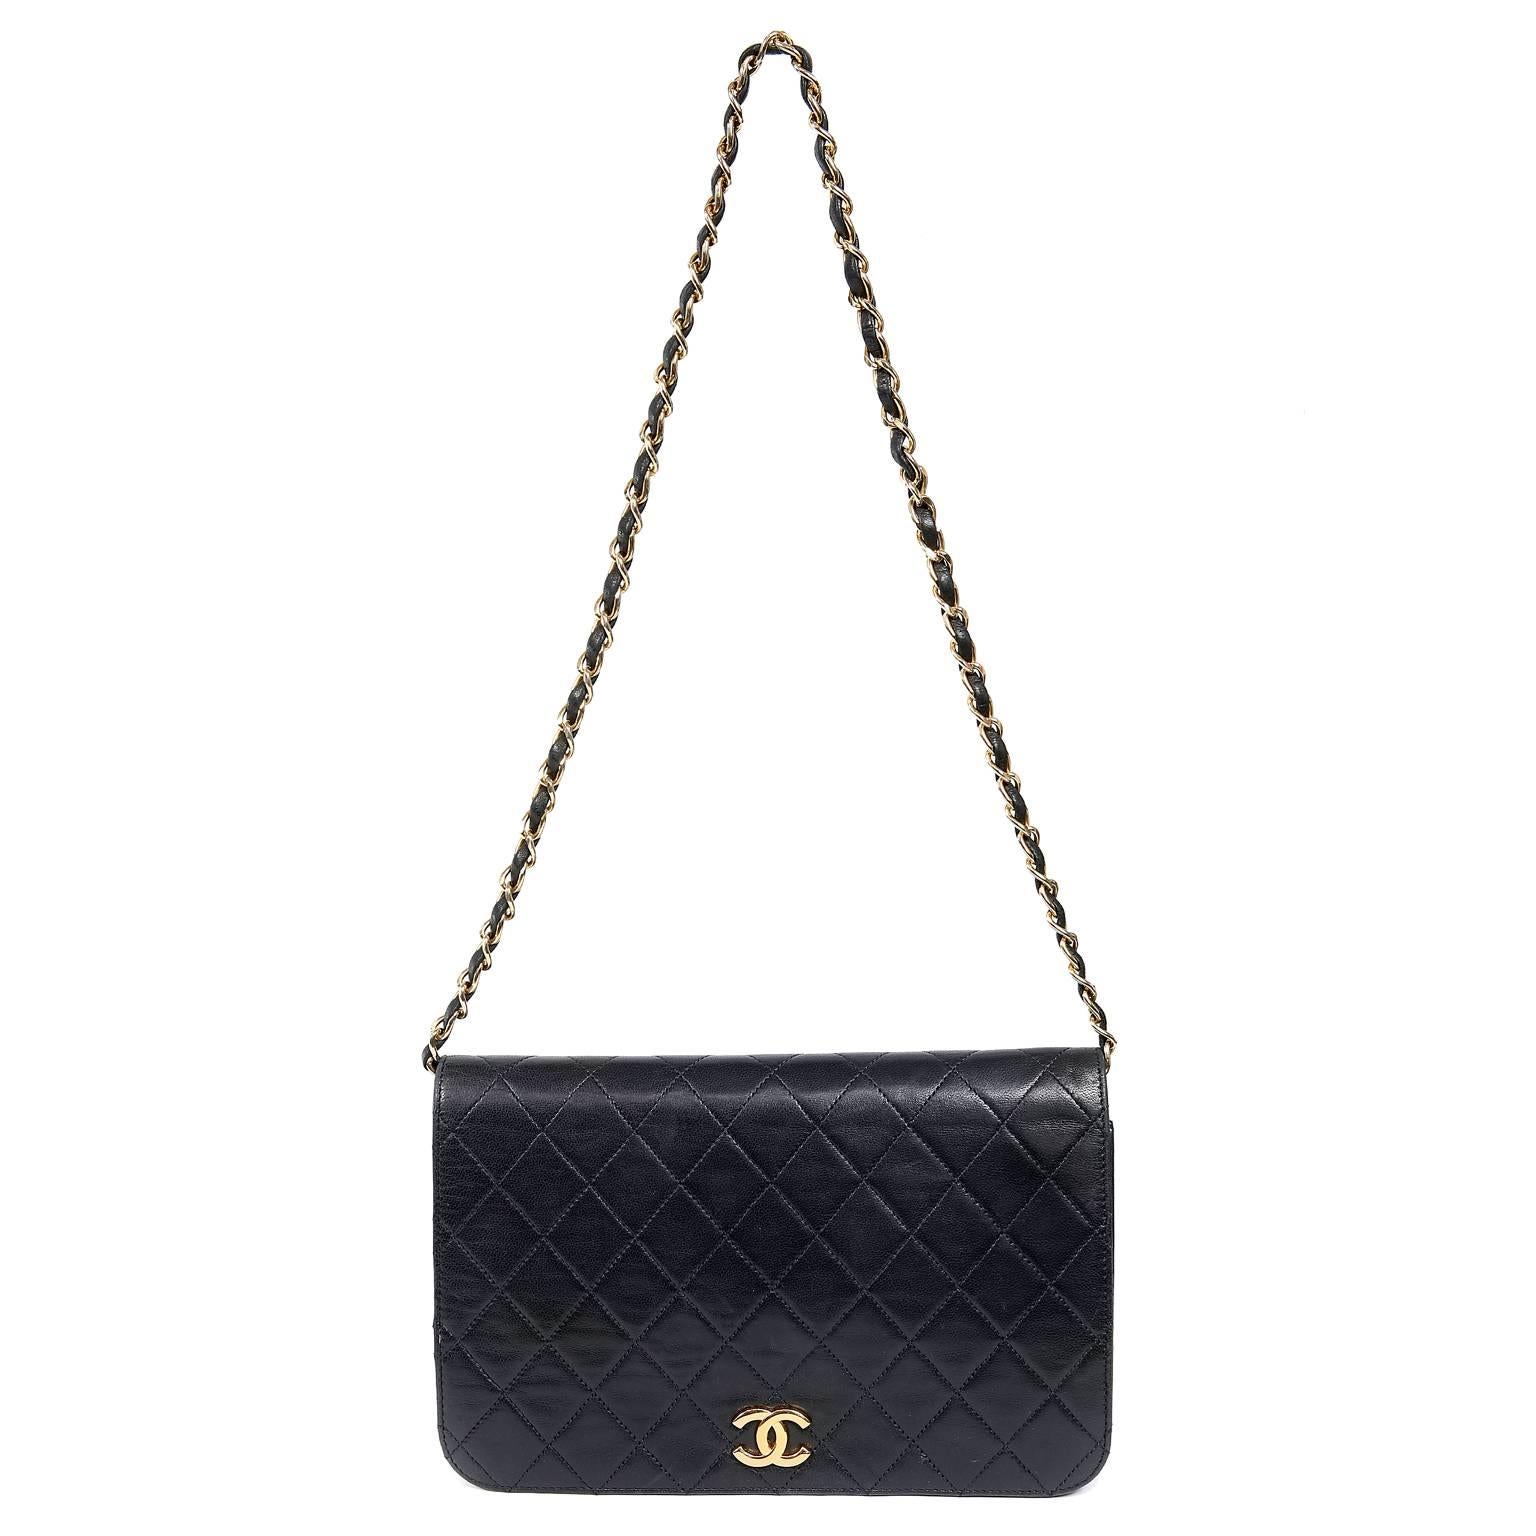 Chanel Black Leather Vintage Clutch with Strap 8